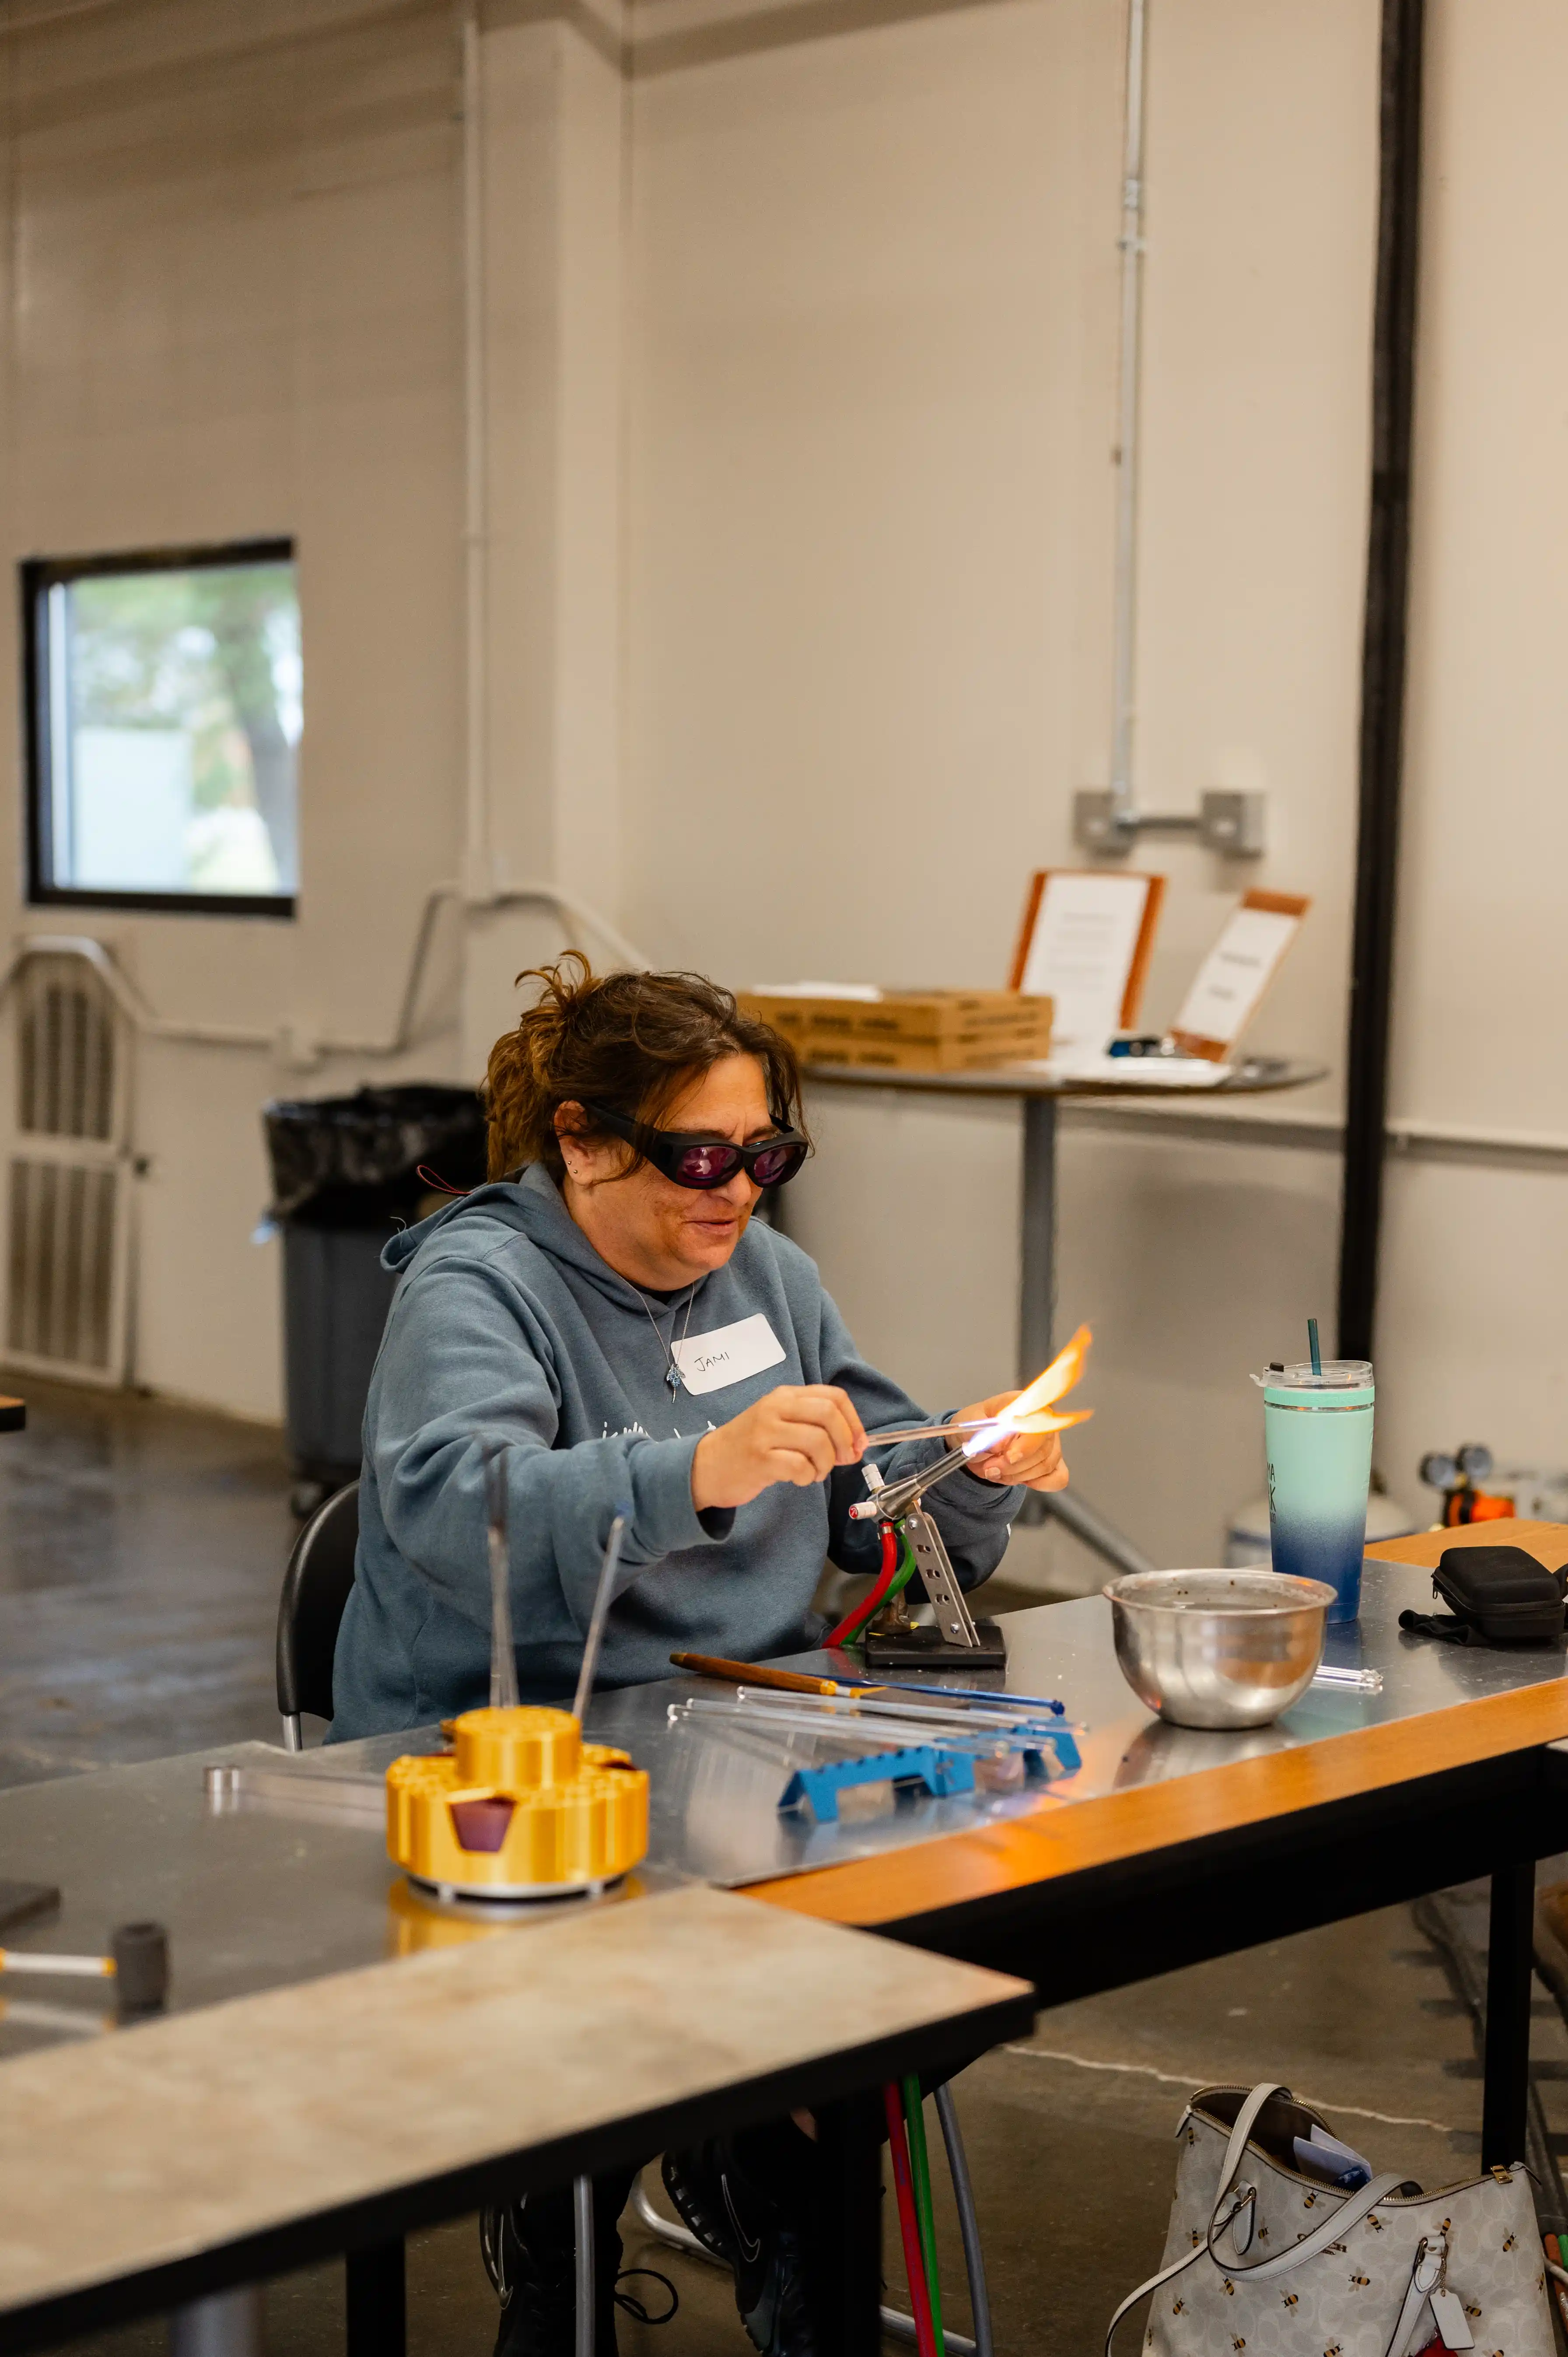 Person wearing safety goggles working with a glassblowing torch in a workshop setting.